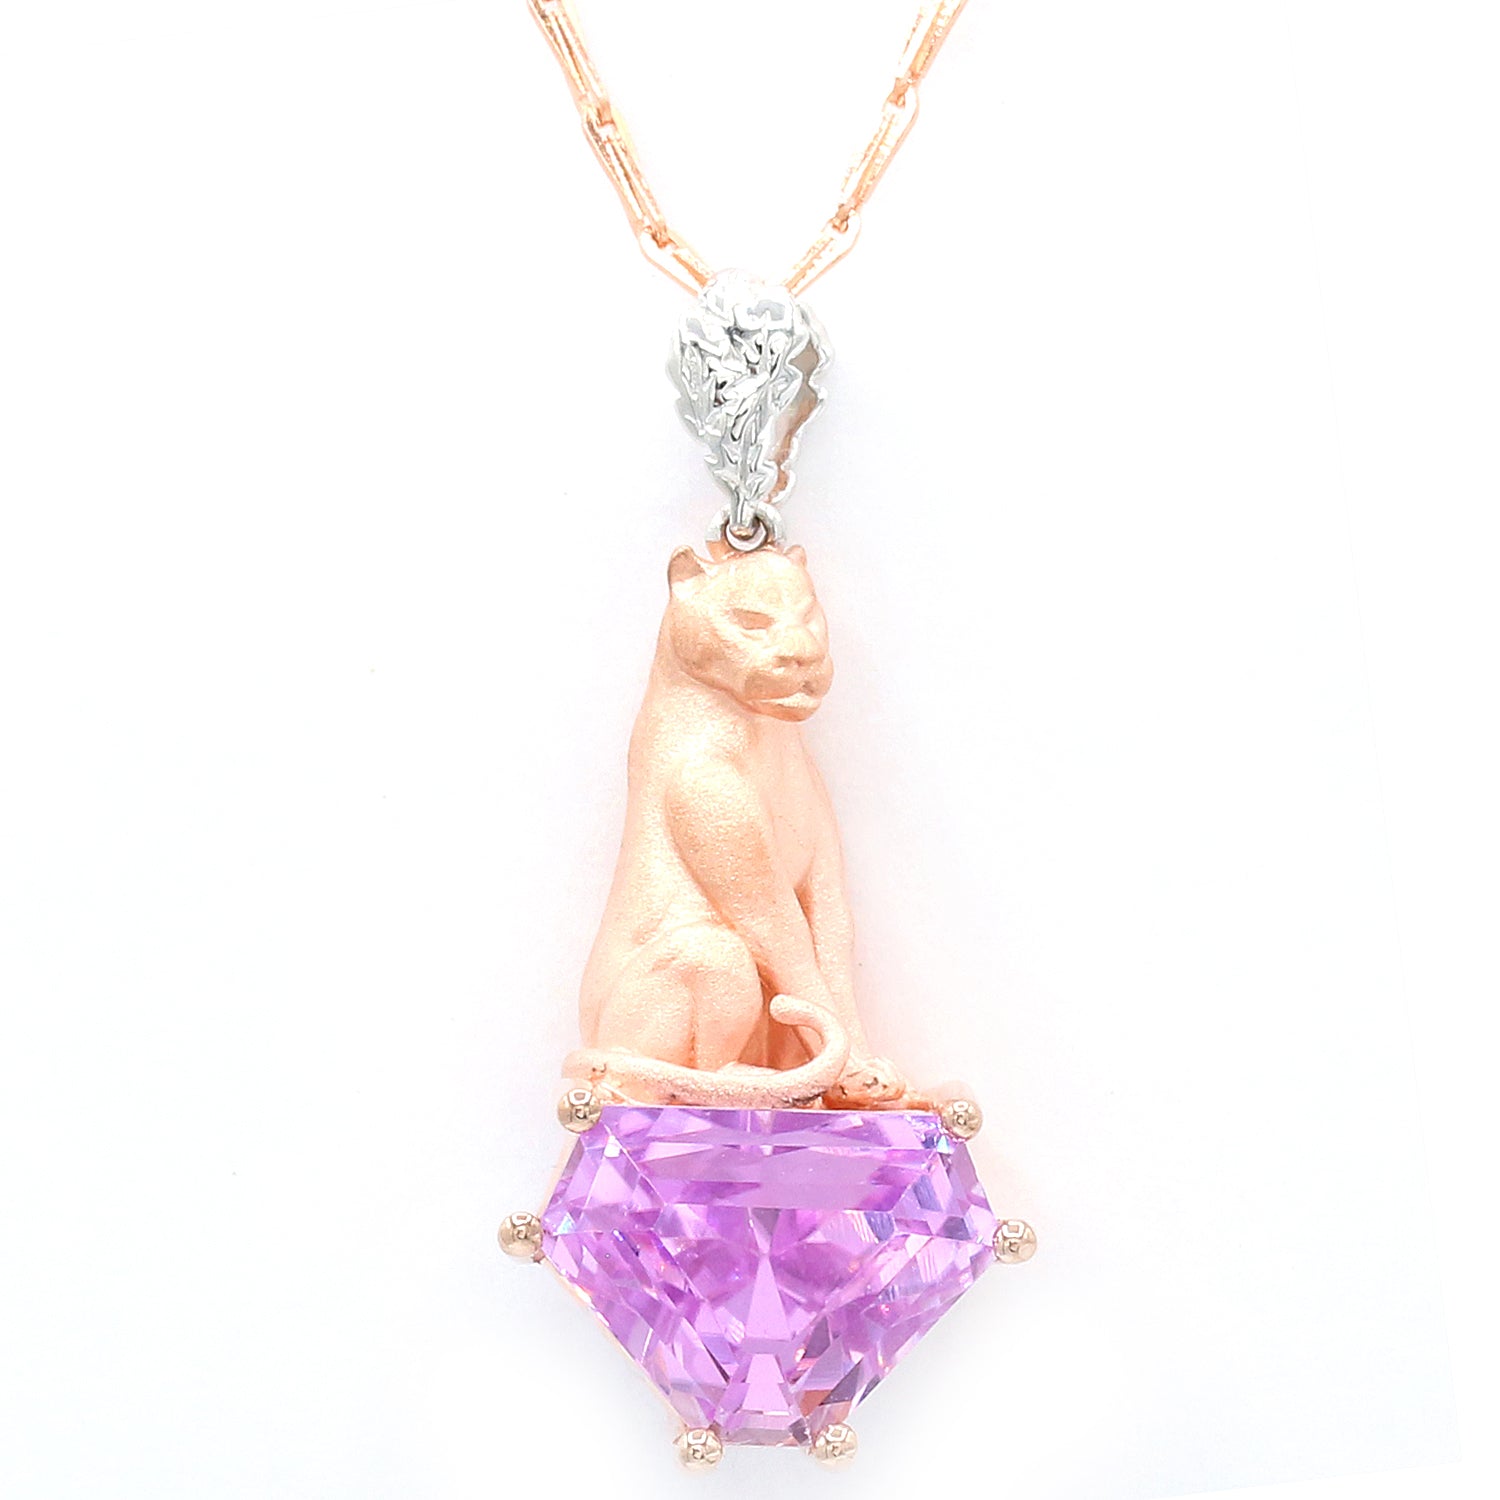 Limited Edition Gems en Vogue Luxe One-of-a-Kind 9.92ctw Kunzite Panther Pendant